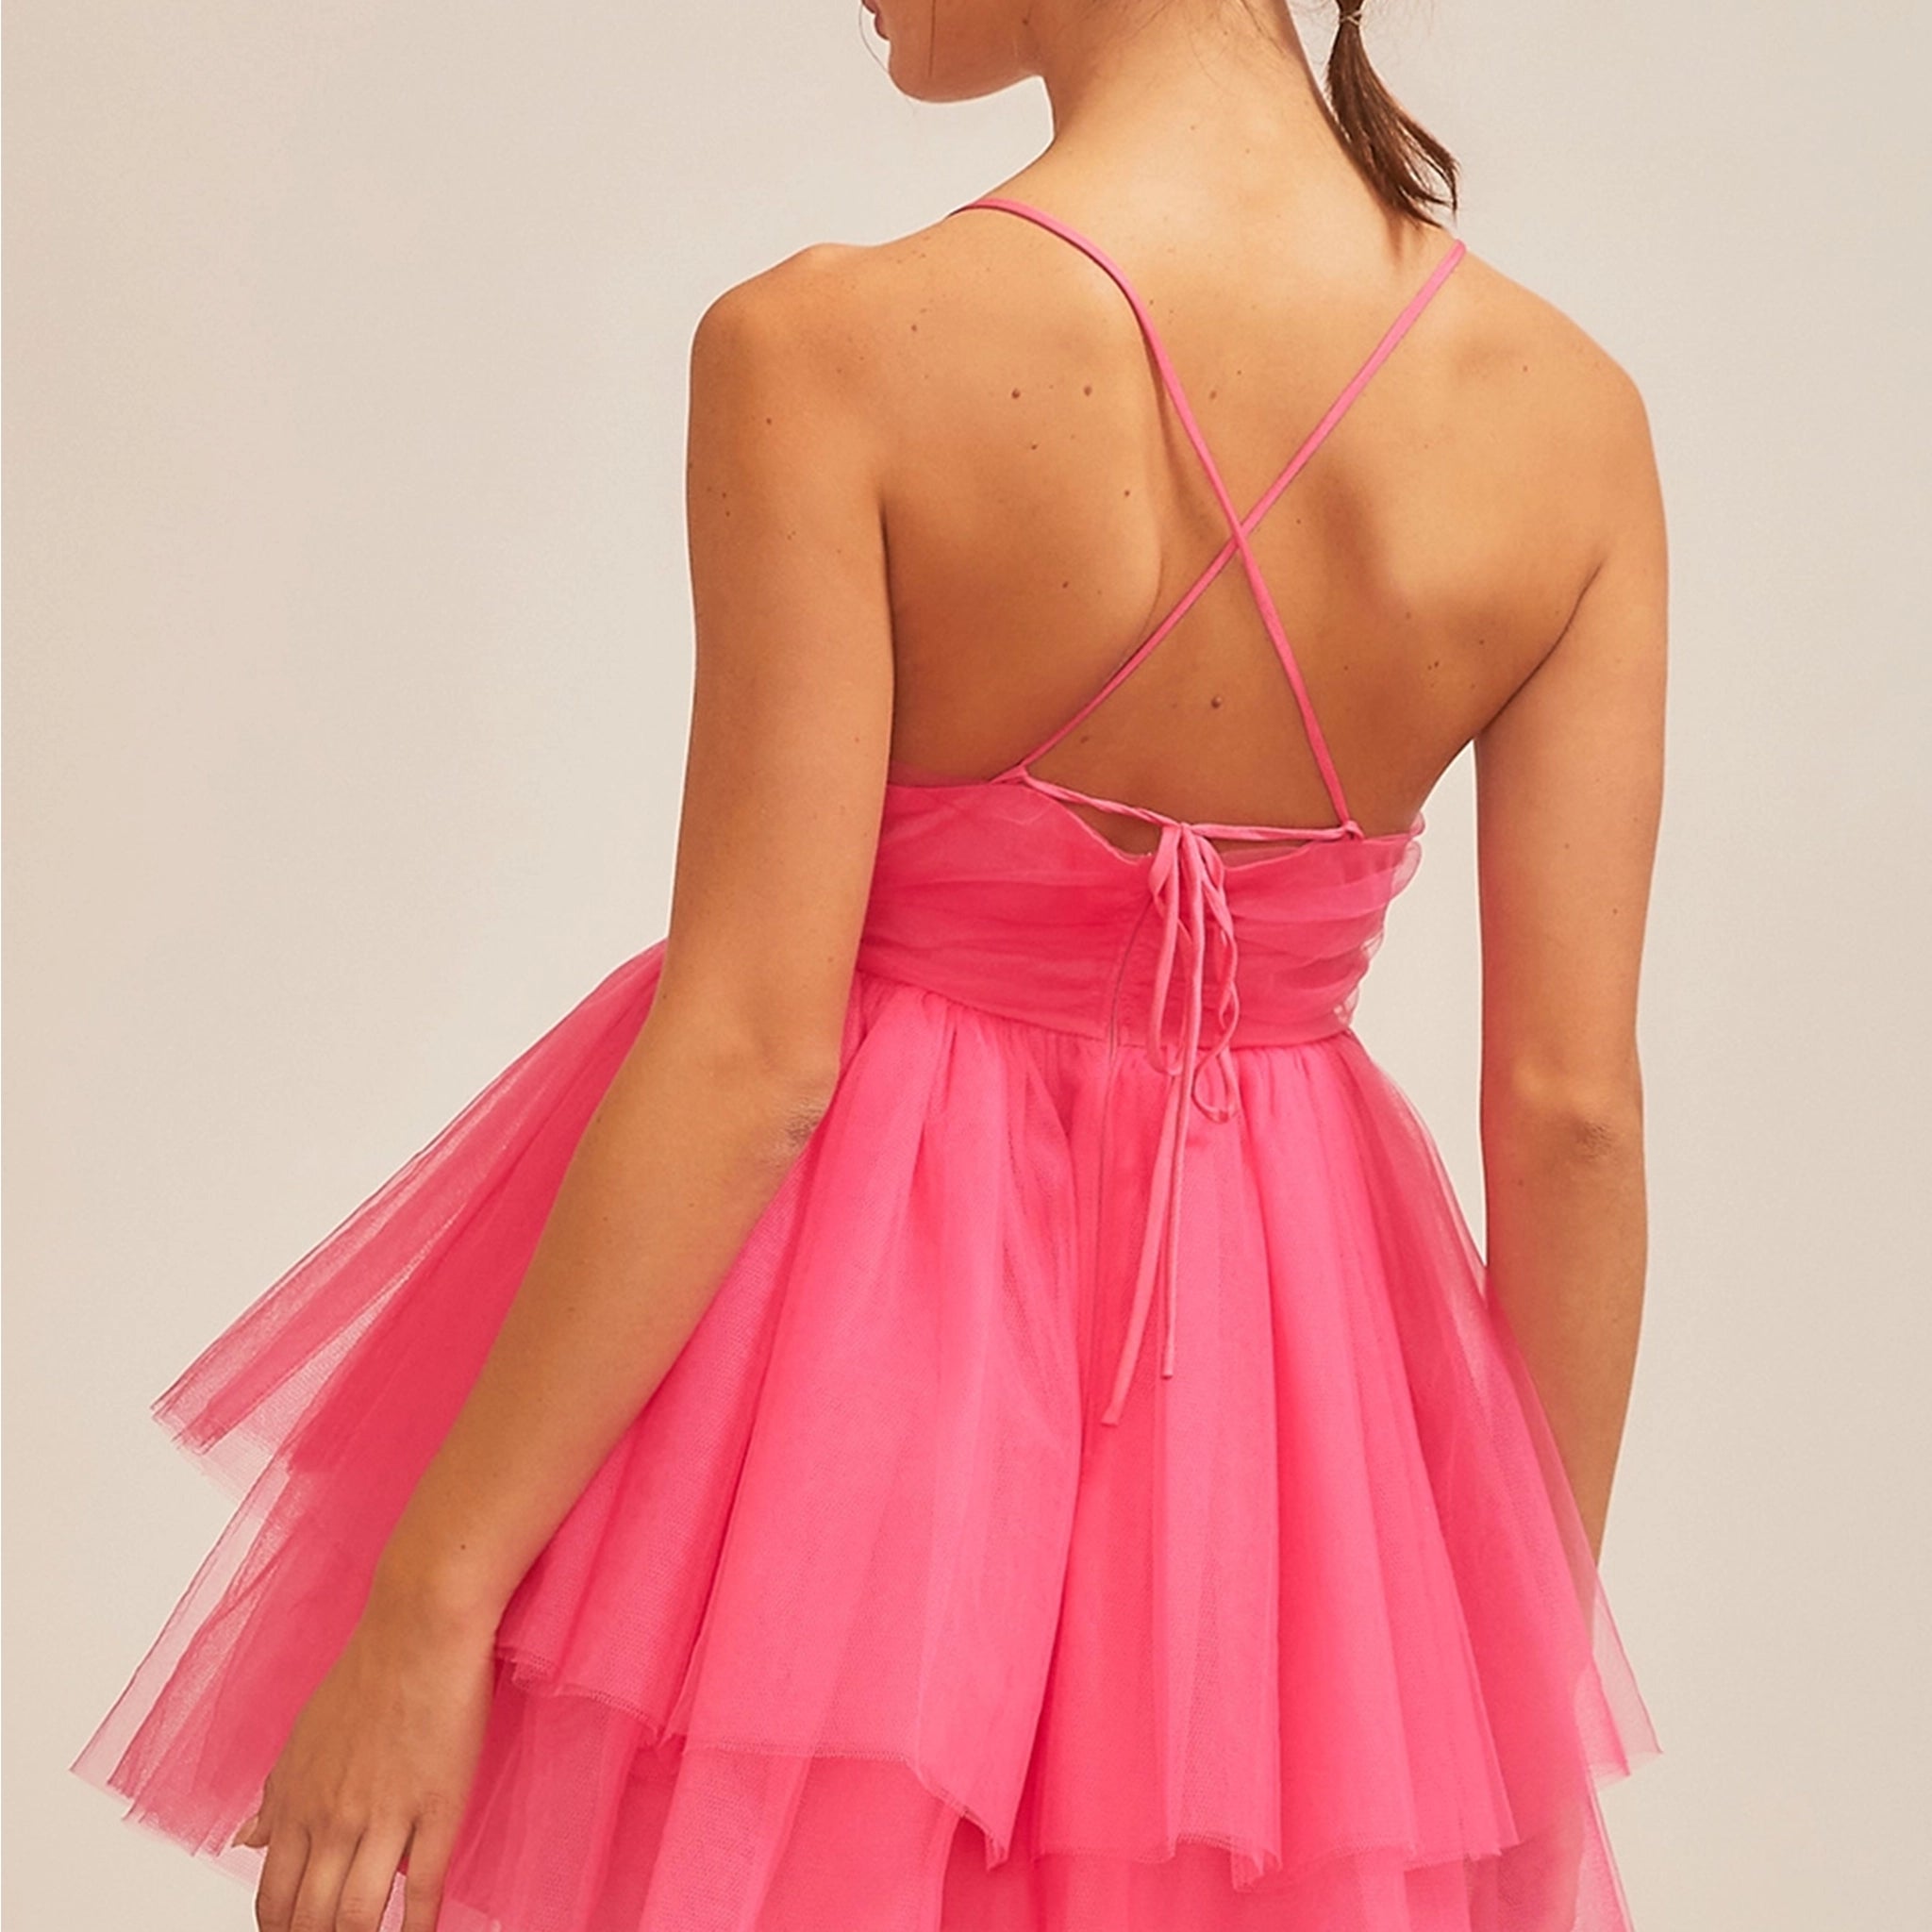 On a neutral background is a model wearing a hot pink tulle mini dress with a sweetheart neckline and thin straps.